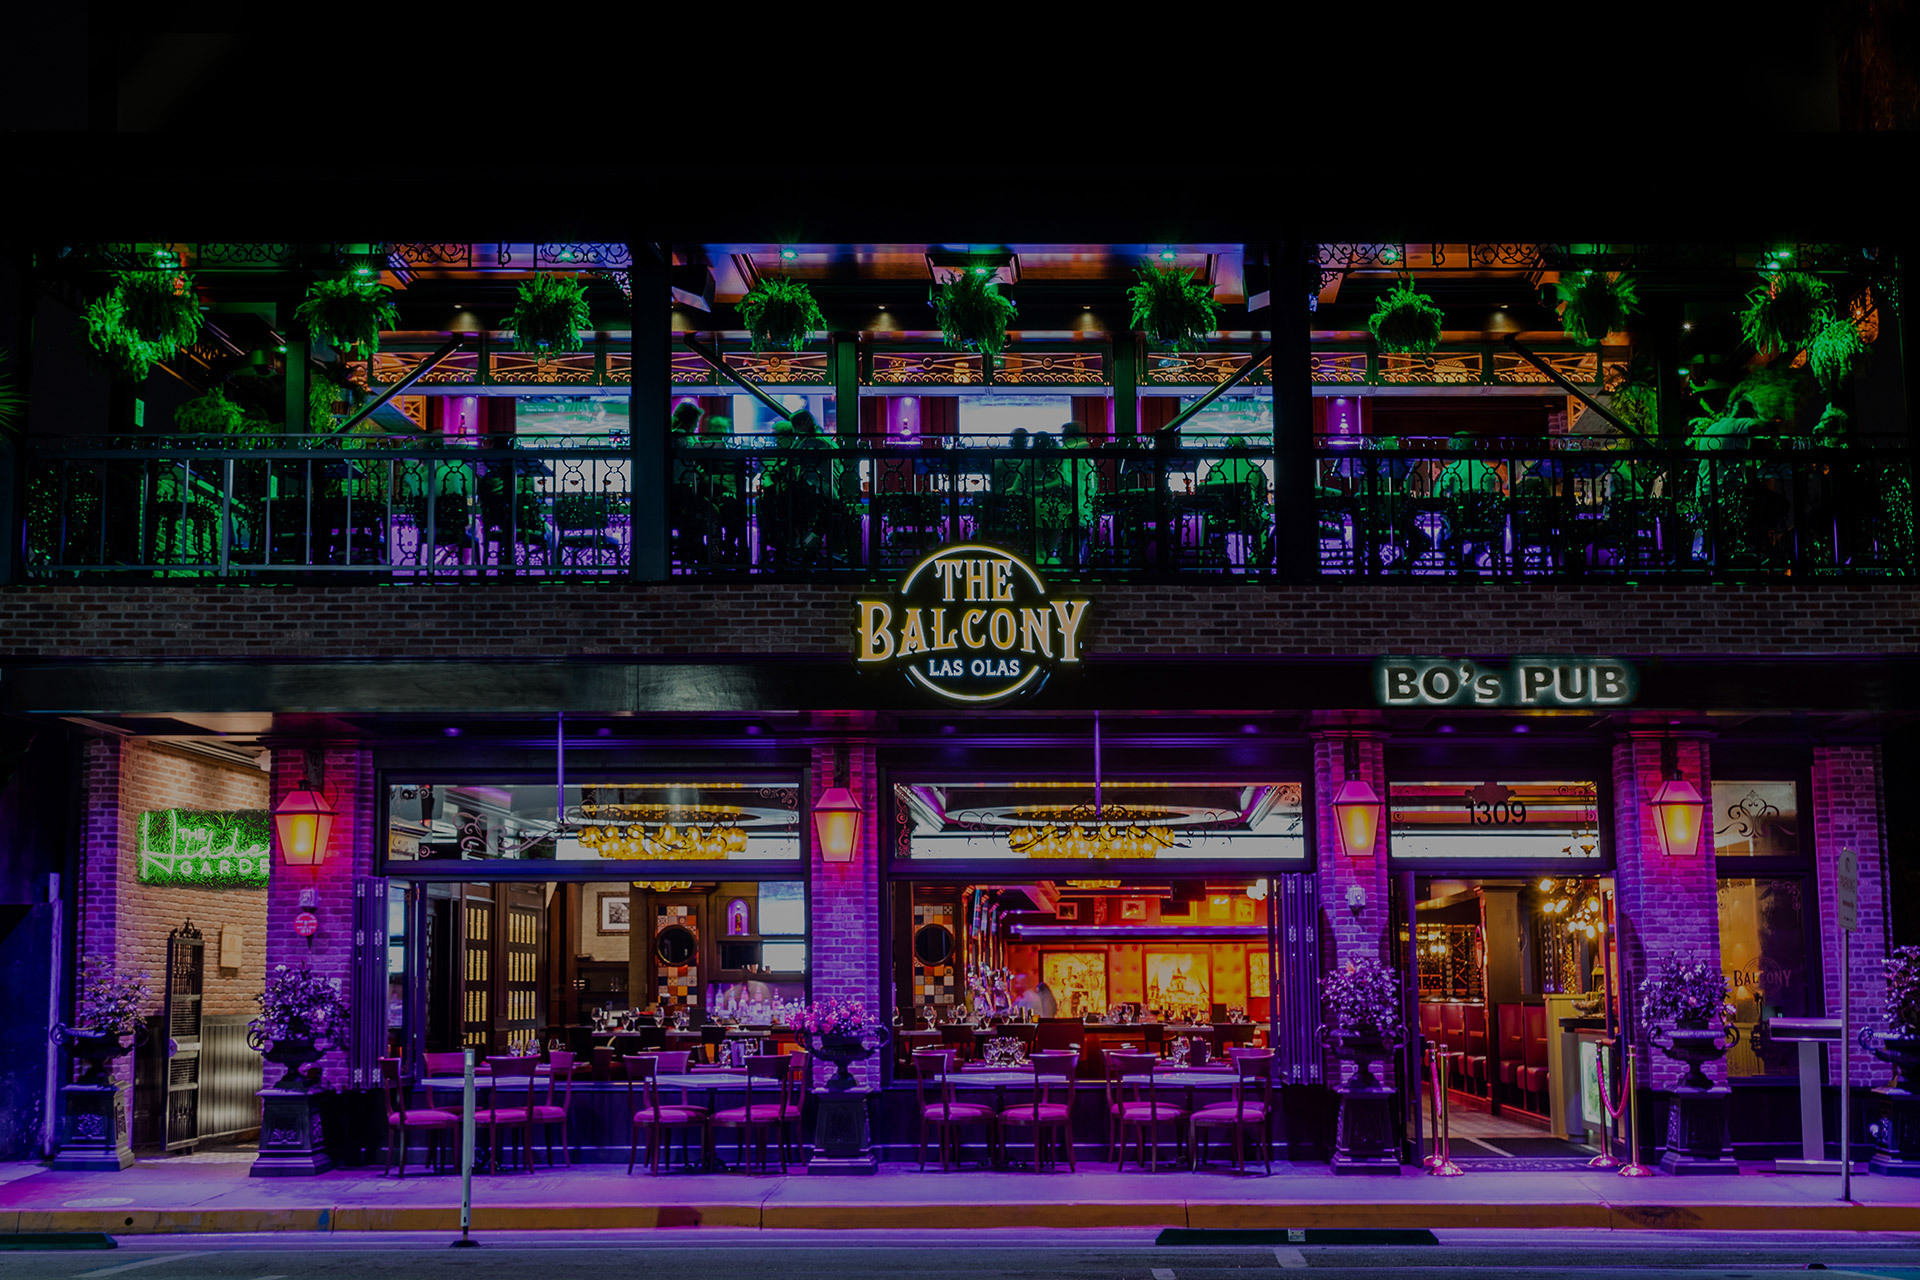 Bo's Pub is an award-winning stylish sports bar and live music venue located on Las Olas Blvd in Fort Lauderdale, Florida.